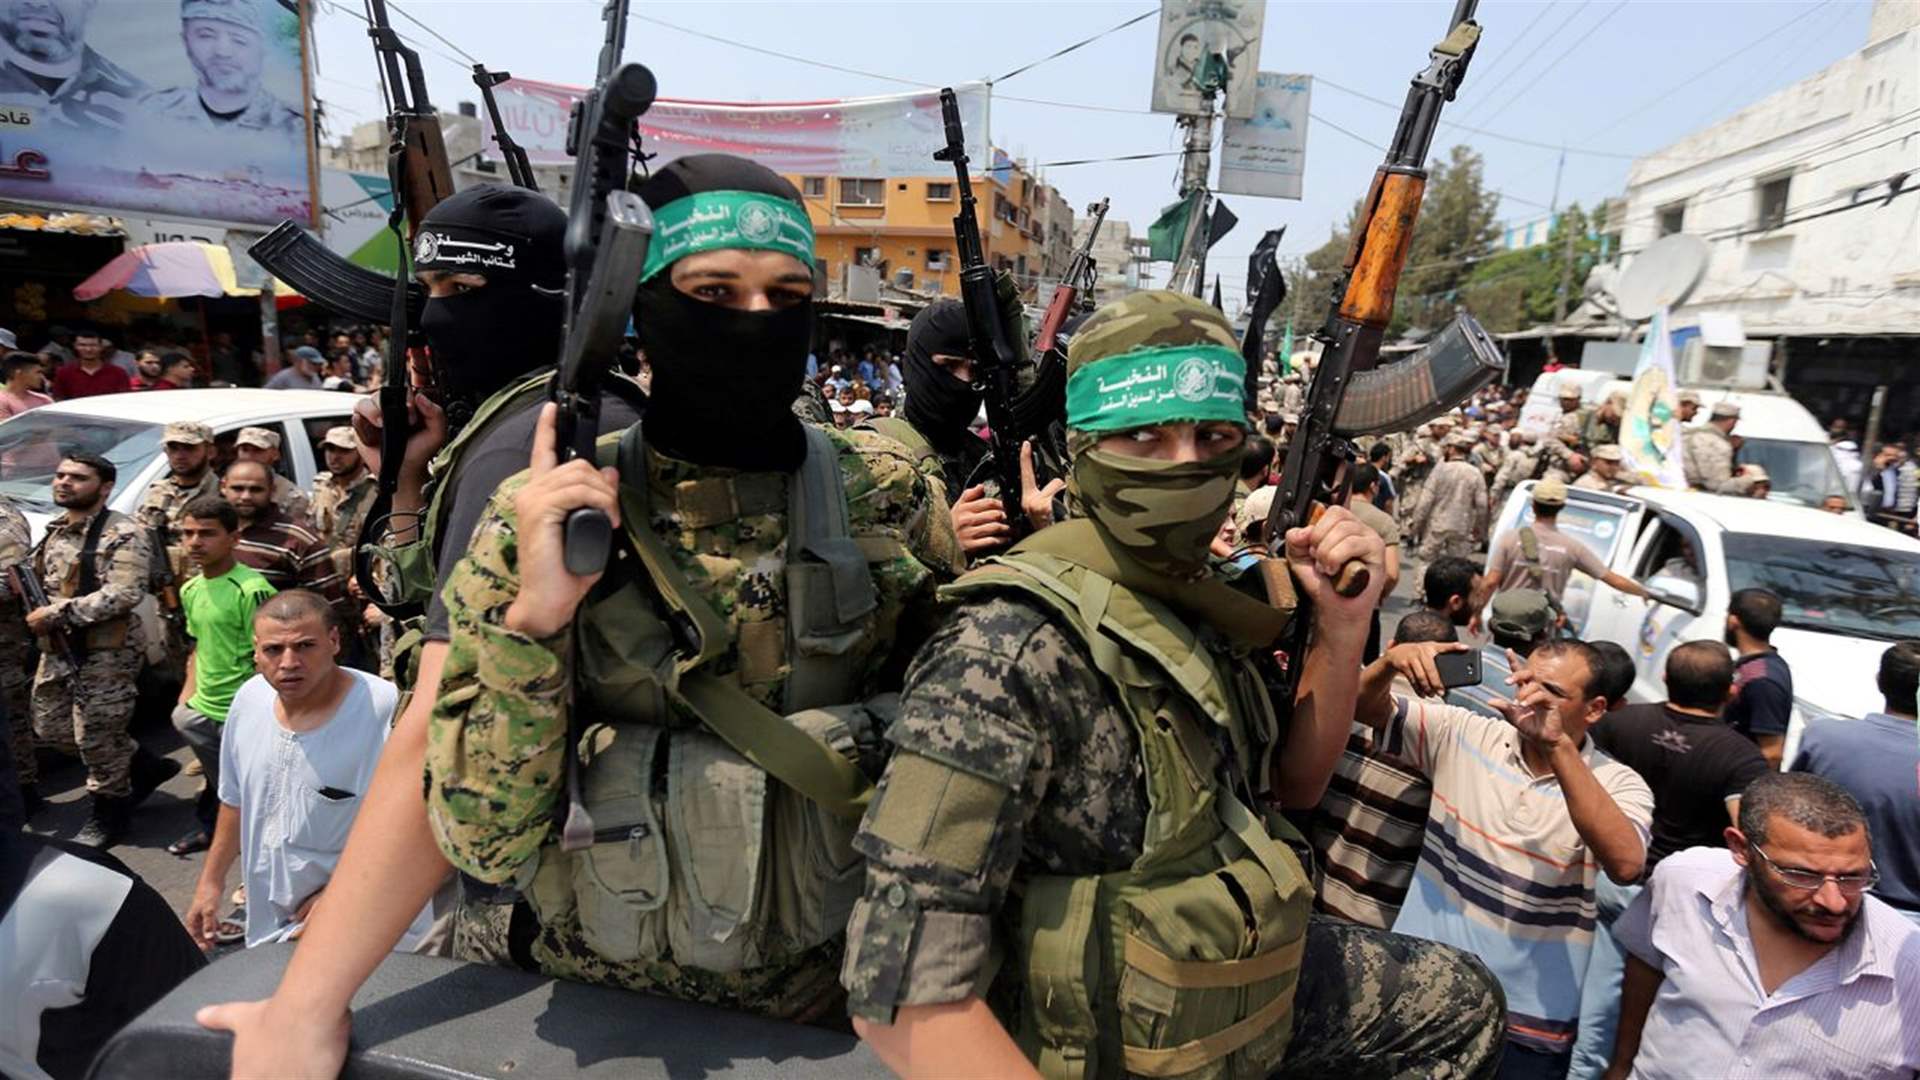 Hamas calls for general mobilization in Arab and Islamic world in solidarity with Palestine